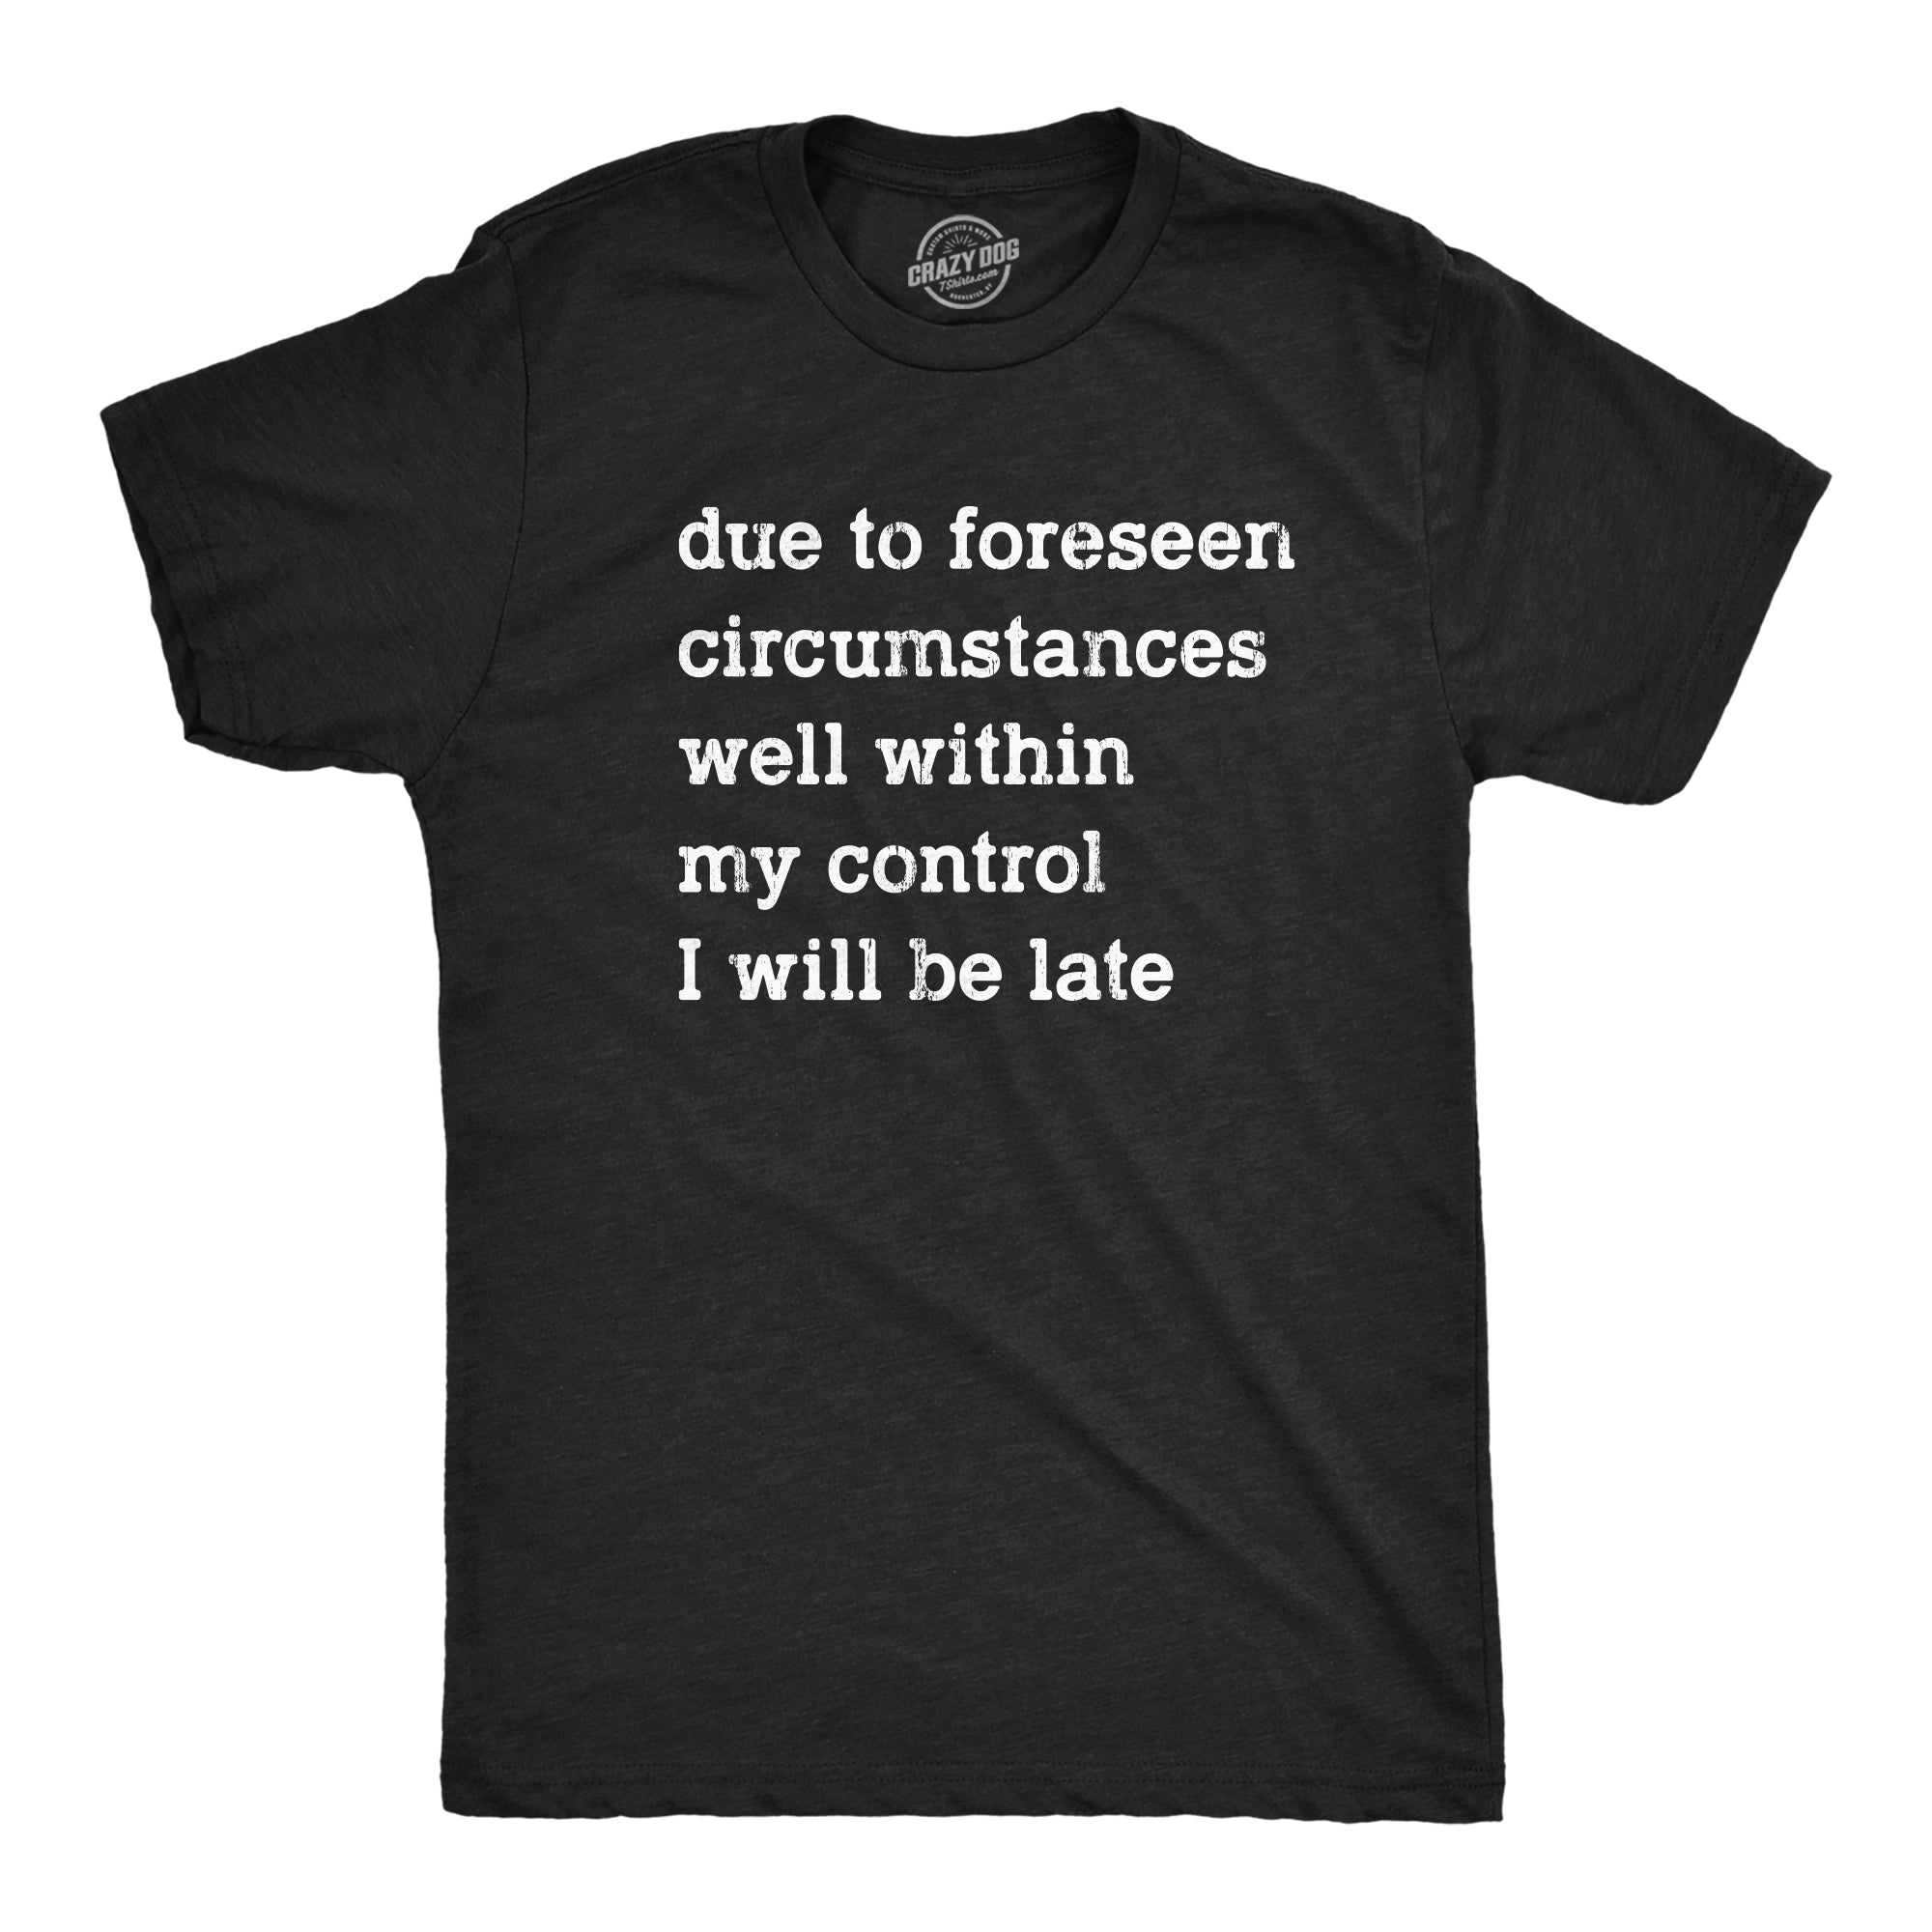 Funny Heather Black Due To Forseen Circumstances I Will Be Late Mens T Shirt Nerdy introvert Tee